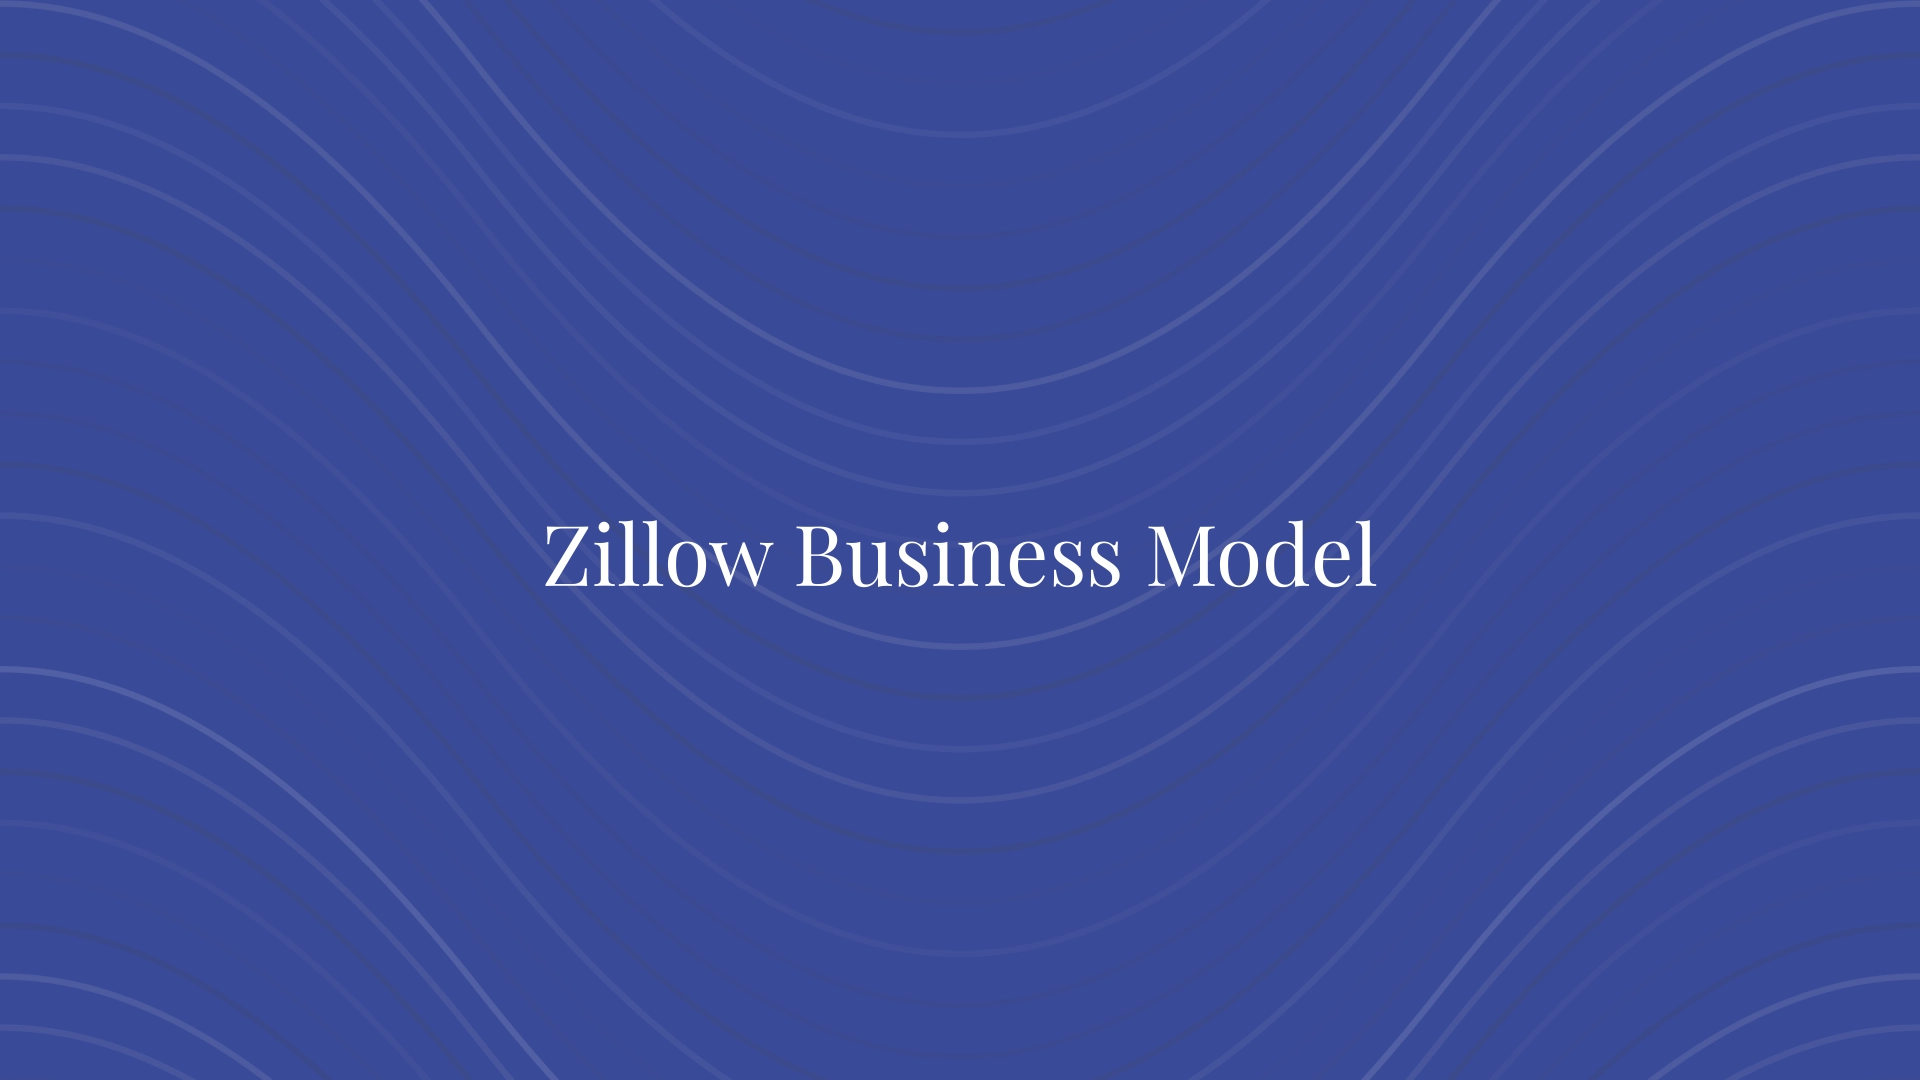 Zillow Business Model